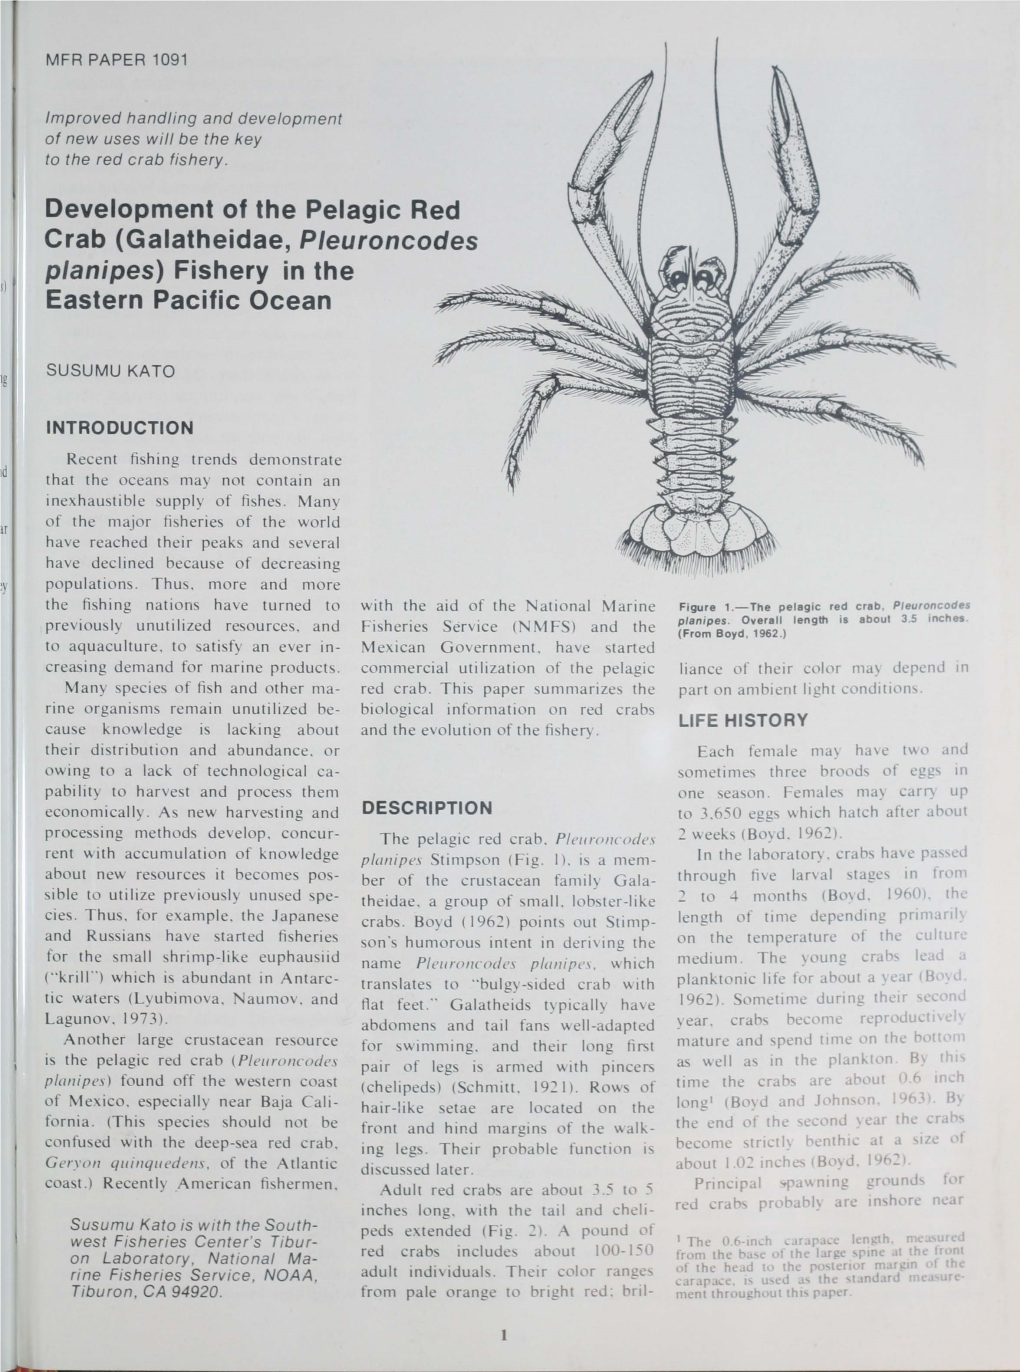 Development of the Pelagic Red Crab (Galatheidae, Pleuroncodes Planipes) Fishery in the Eastern Pacific Ocean